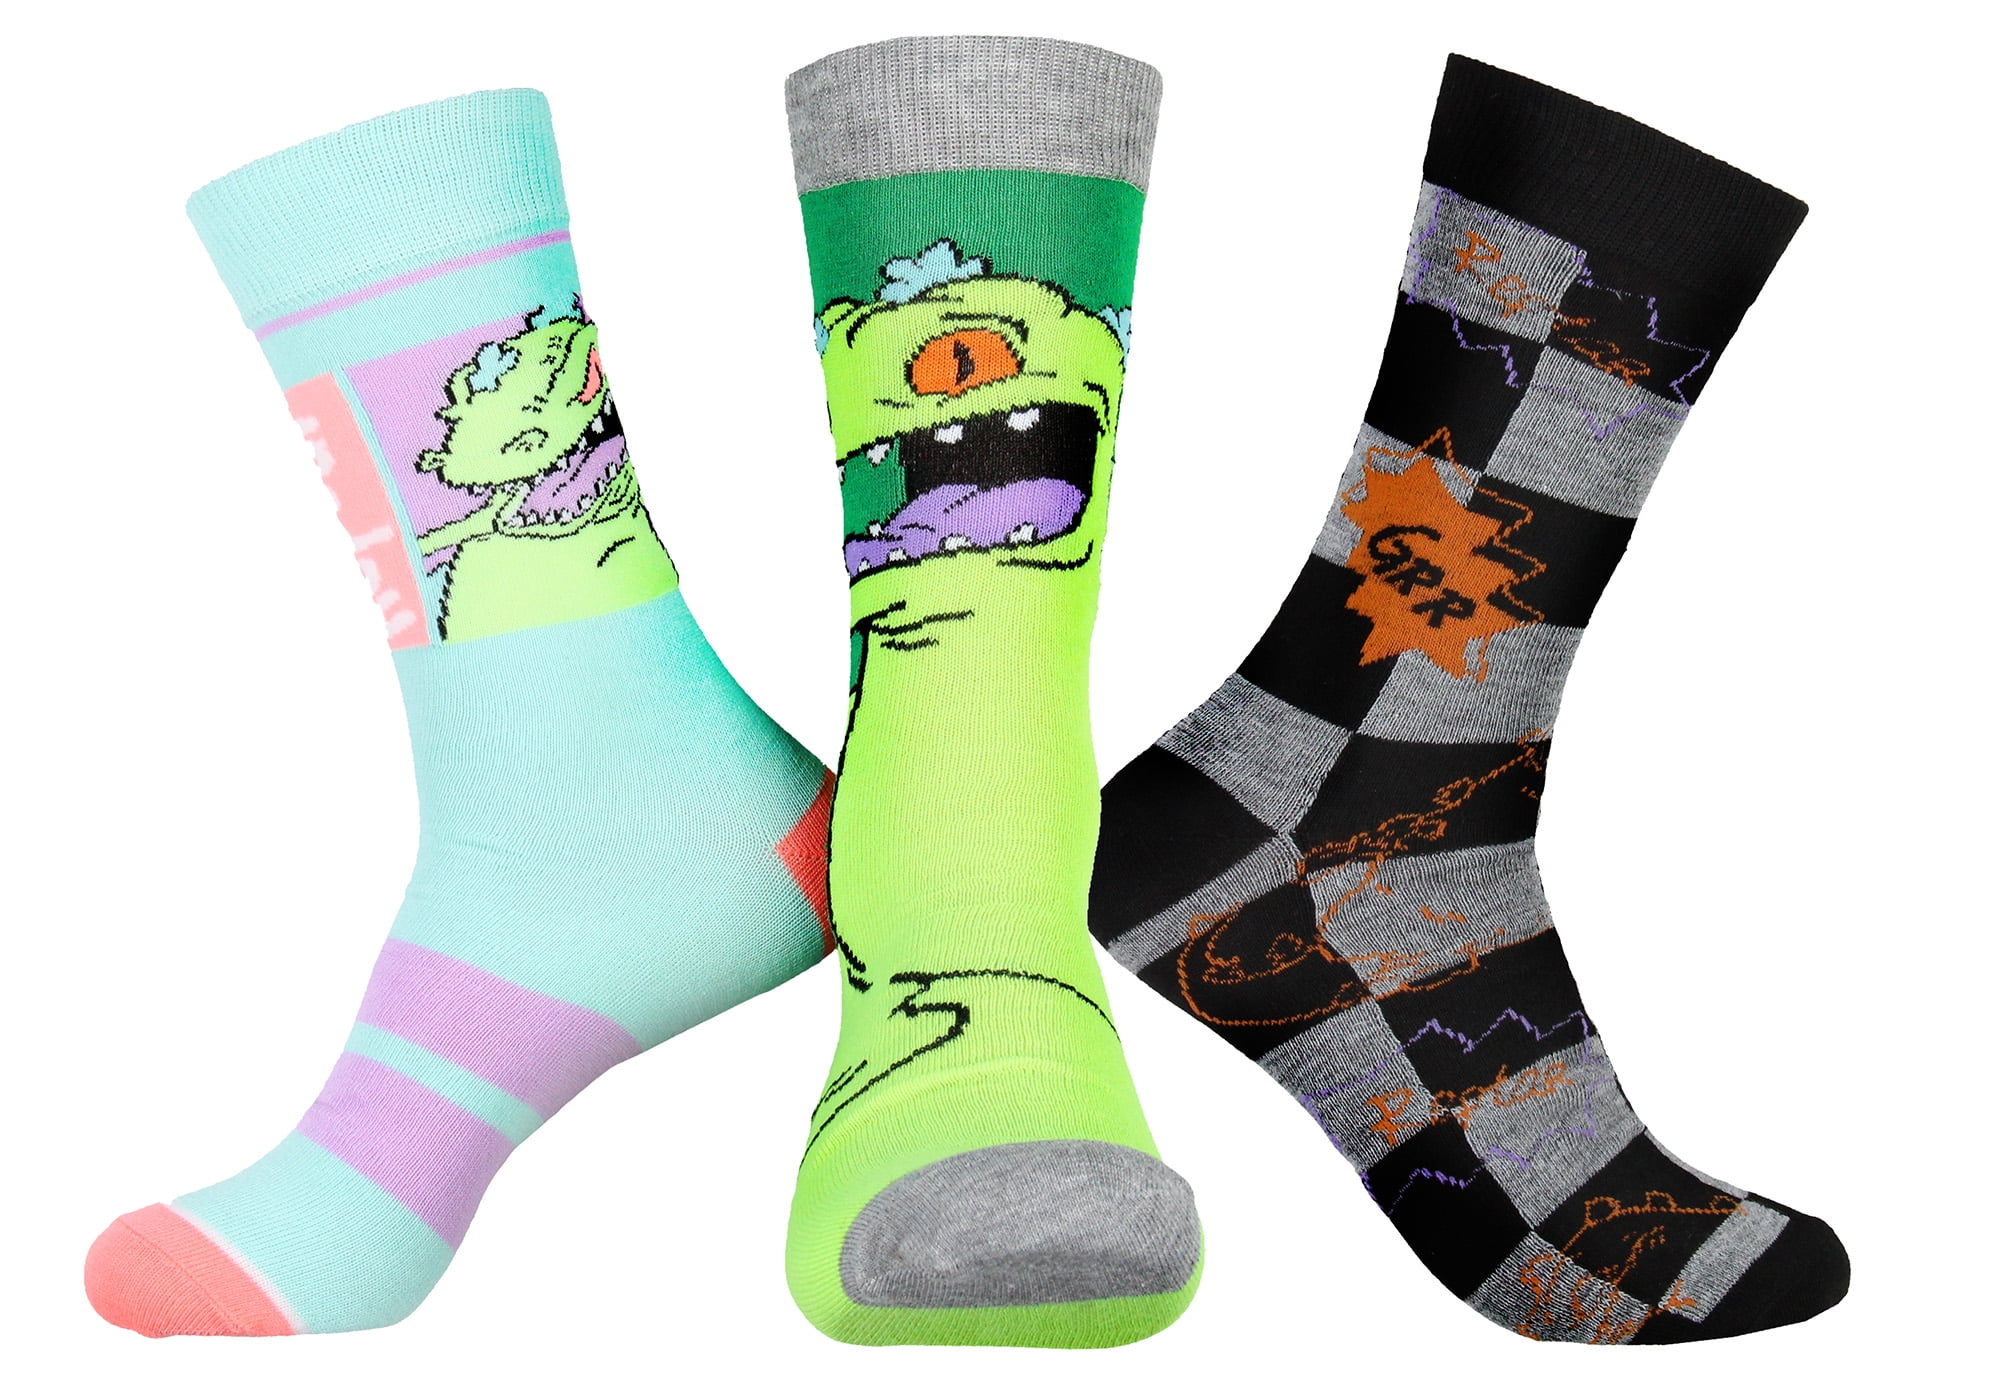 Gift L21 2 Pair Nickelodeon Socks Rugrats Tommy & Chuckie Men's Shoe Size 6-12 